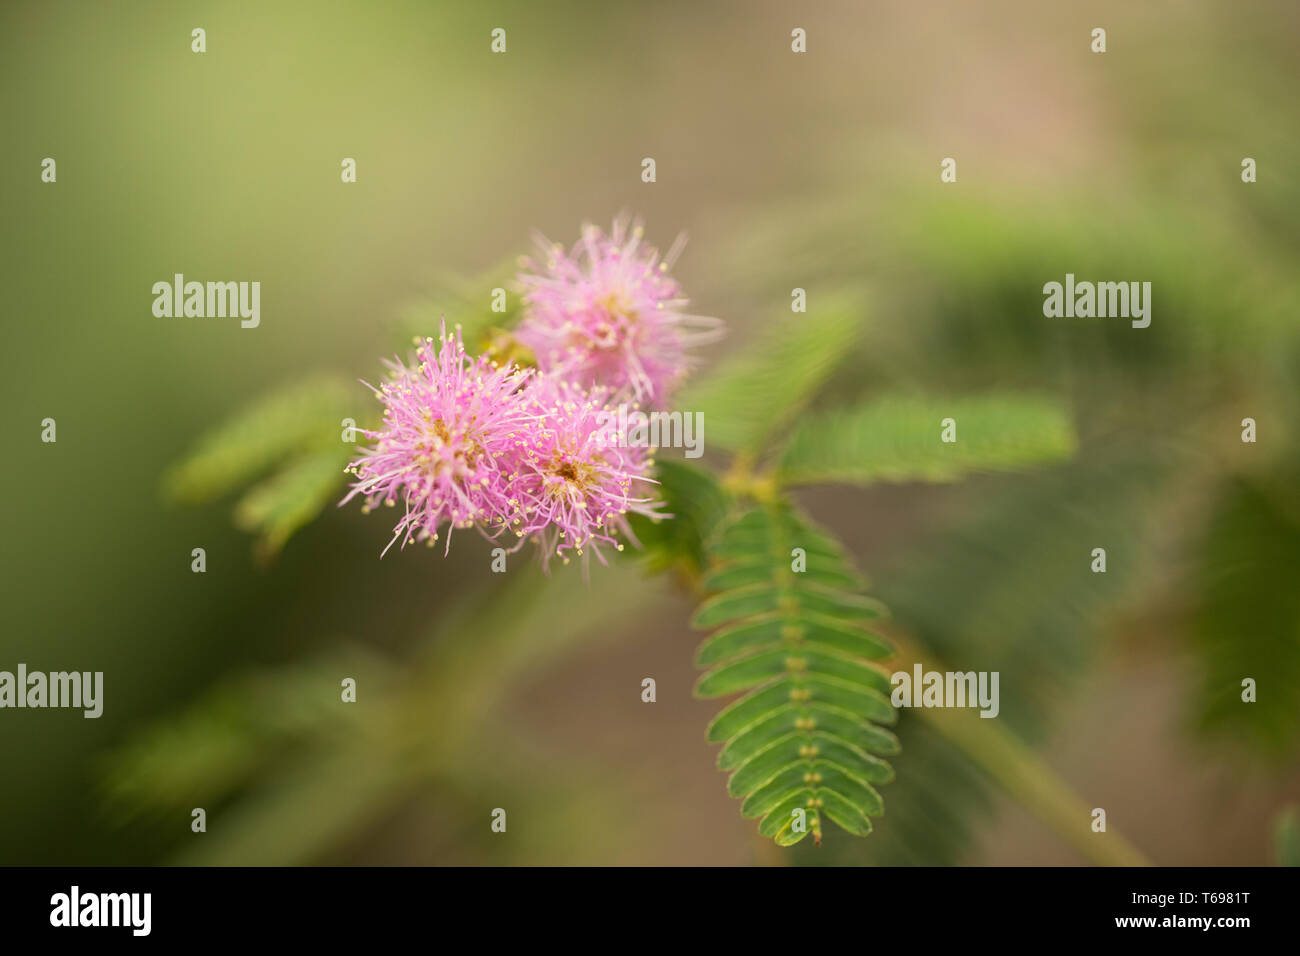 Mimosa pudica, also known as sensitive plant, sleepy plant, action plant, Dormilones, touch-me-not, shameplant, zombie plant, or shy plant. Stock Photo